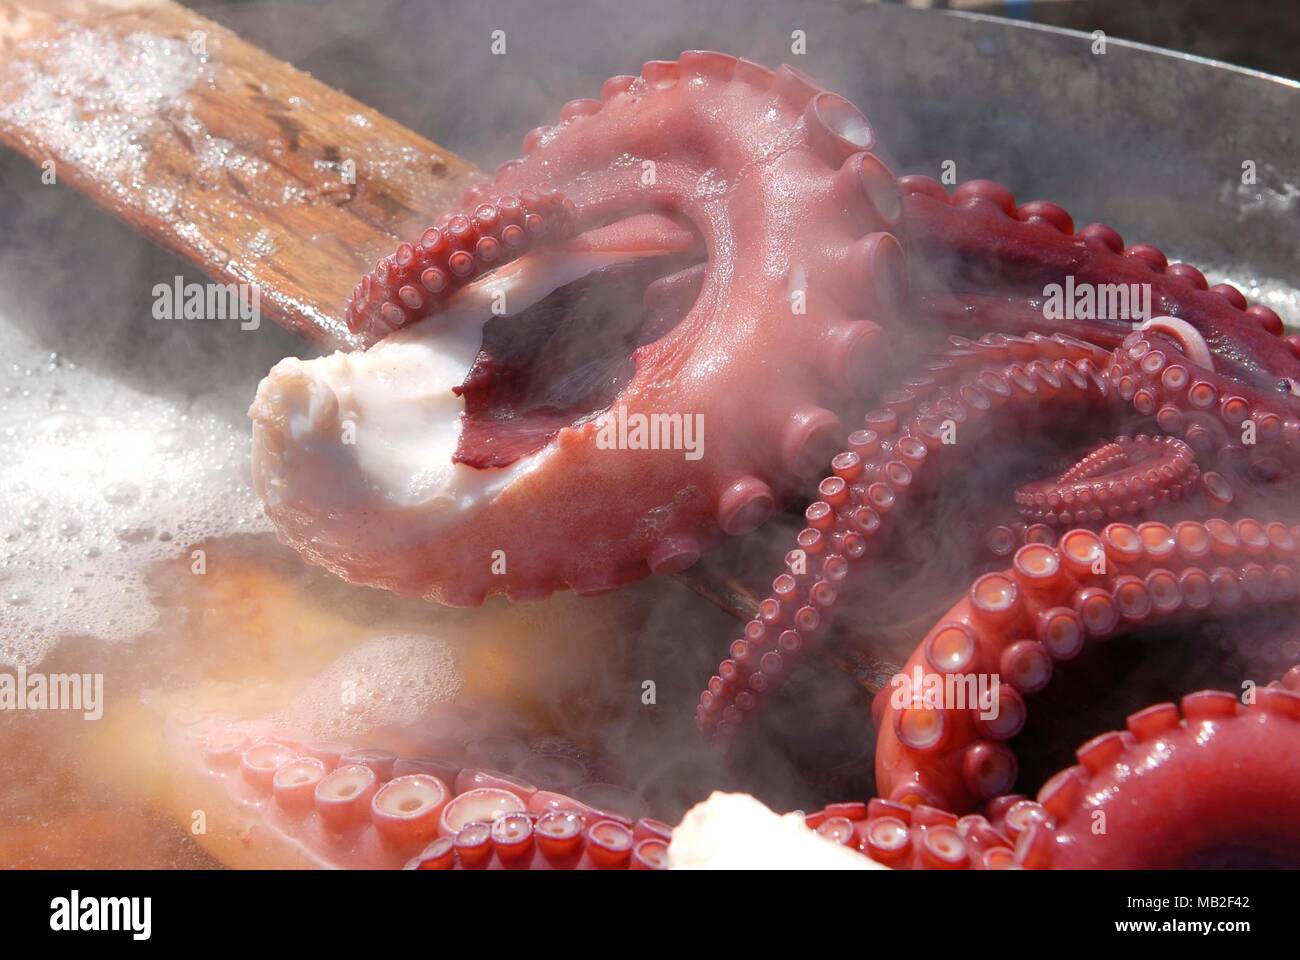 Boiled octopus Stock Photo